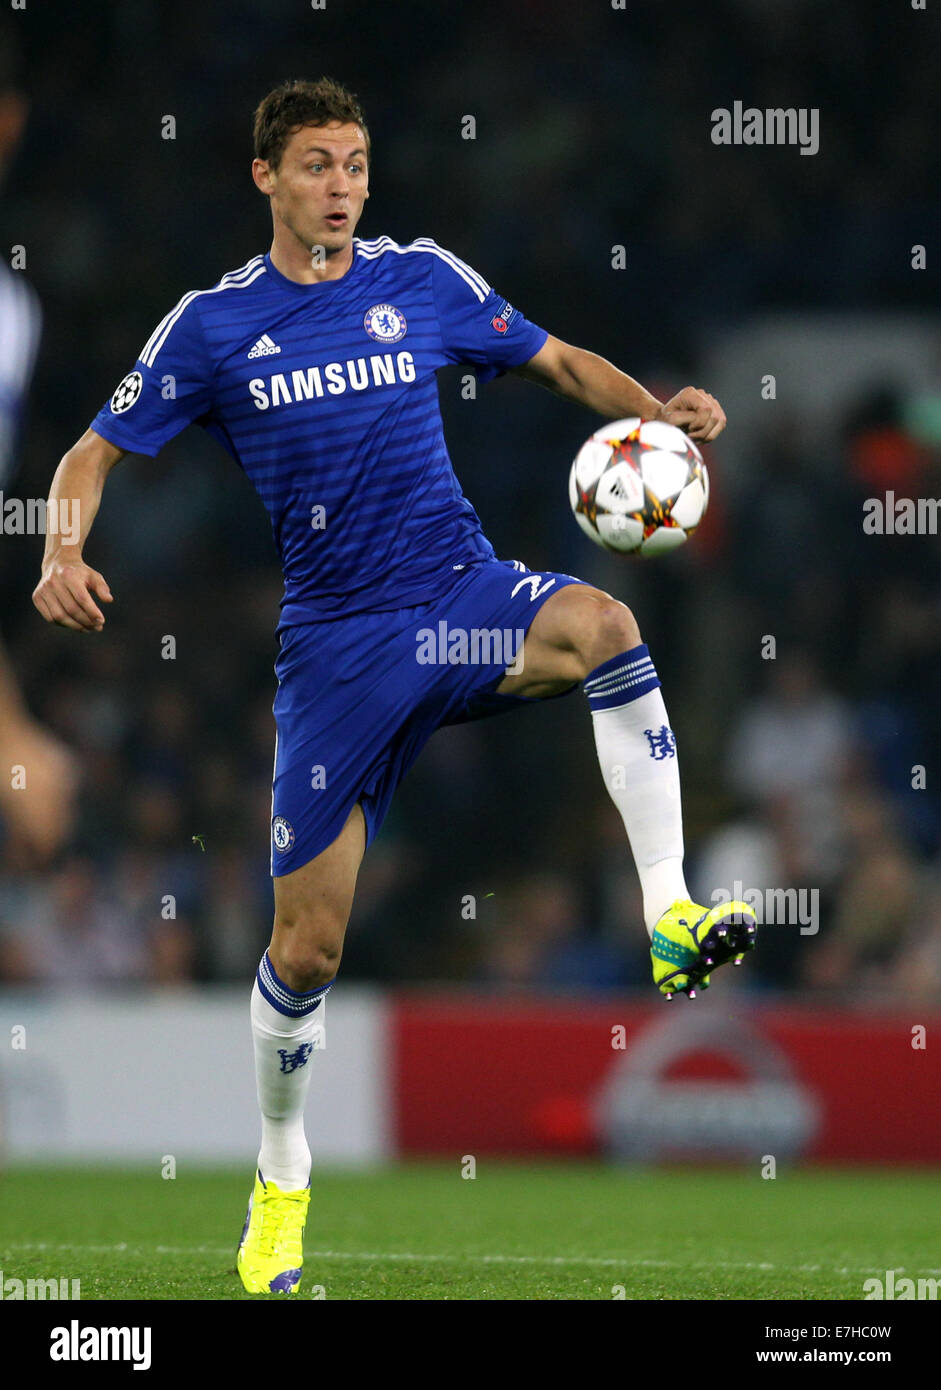 London, Britain. 17th Sep, 2014. Chelsea's Nemanja Matic kicks a ball during the UEFA Champions League Group G soccer match between Chelsea FC and FC Schalke 04 at Stamford Bridge stadium in London, Britain, 17 September 2014. Photo: Ina Fassbender/dpa/Alamy Live News Stock Photo